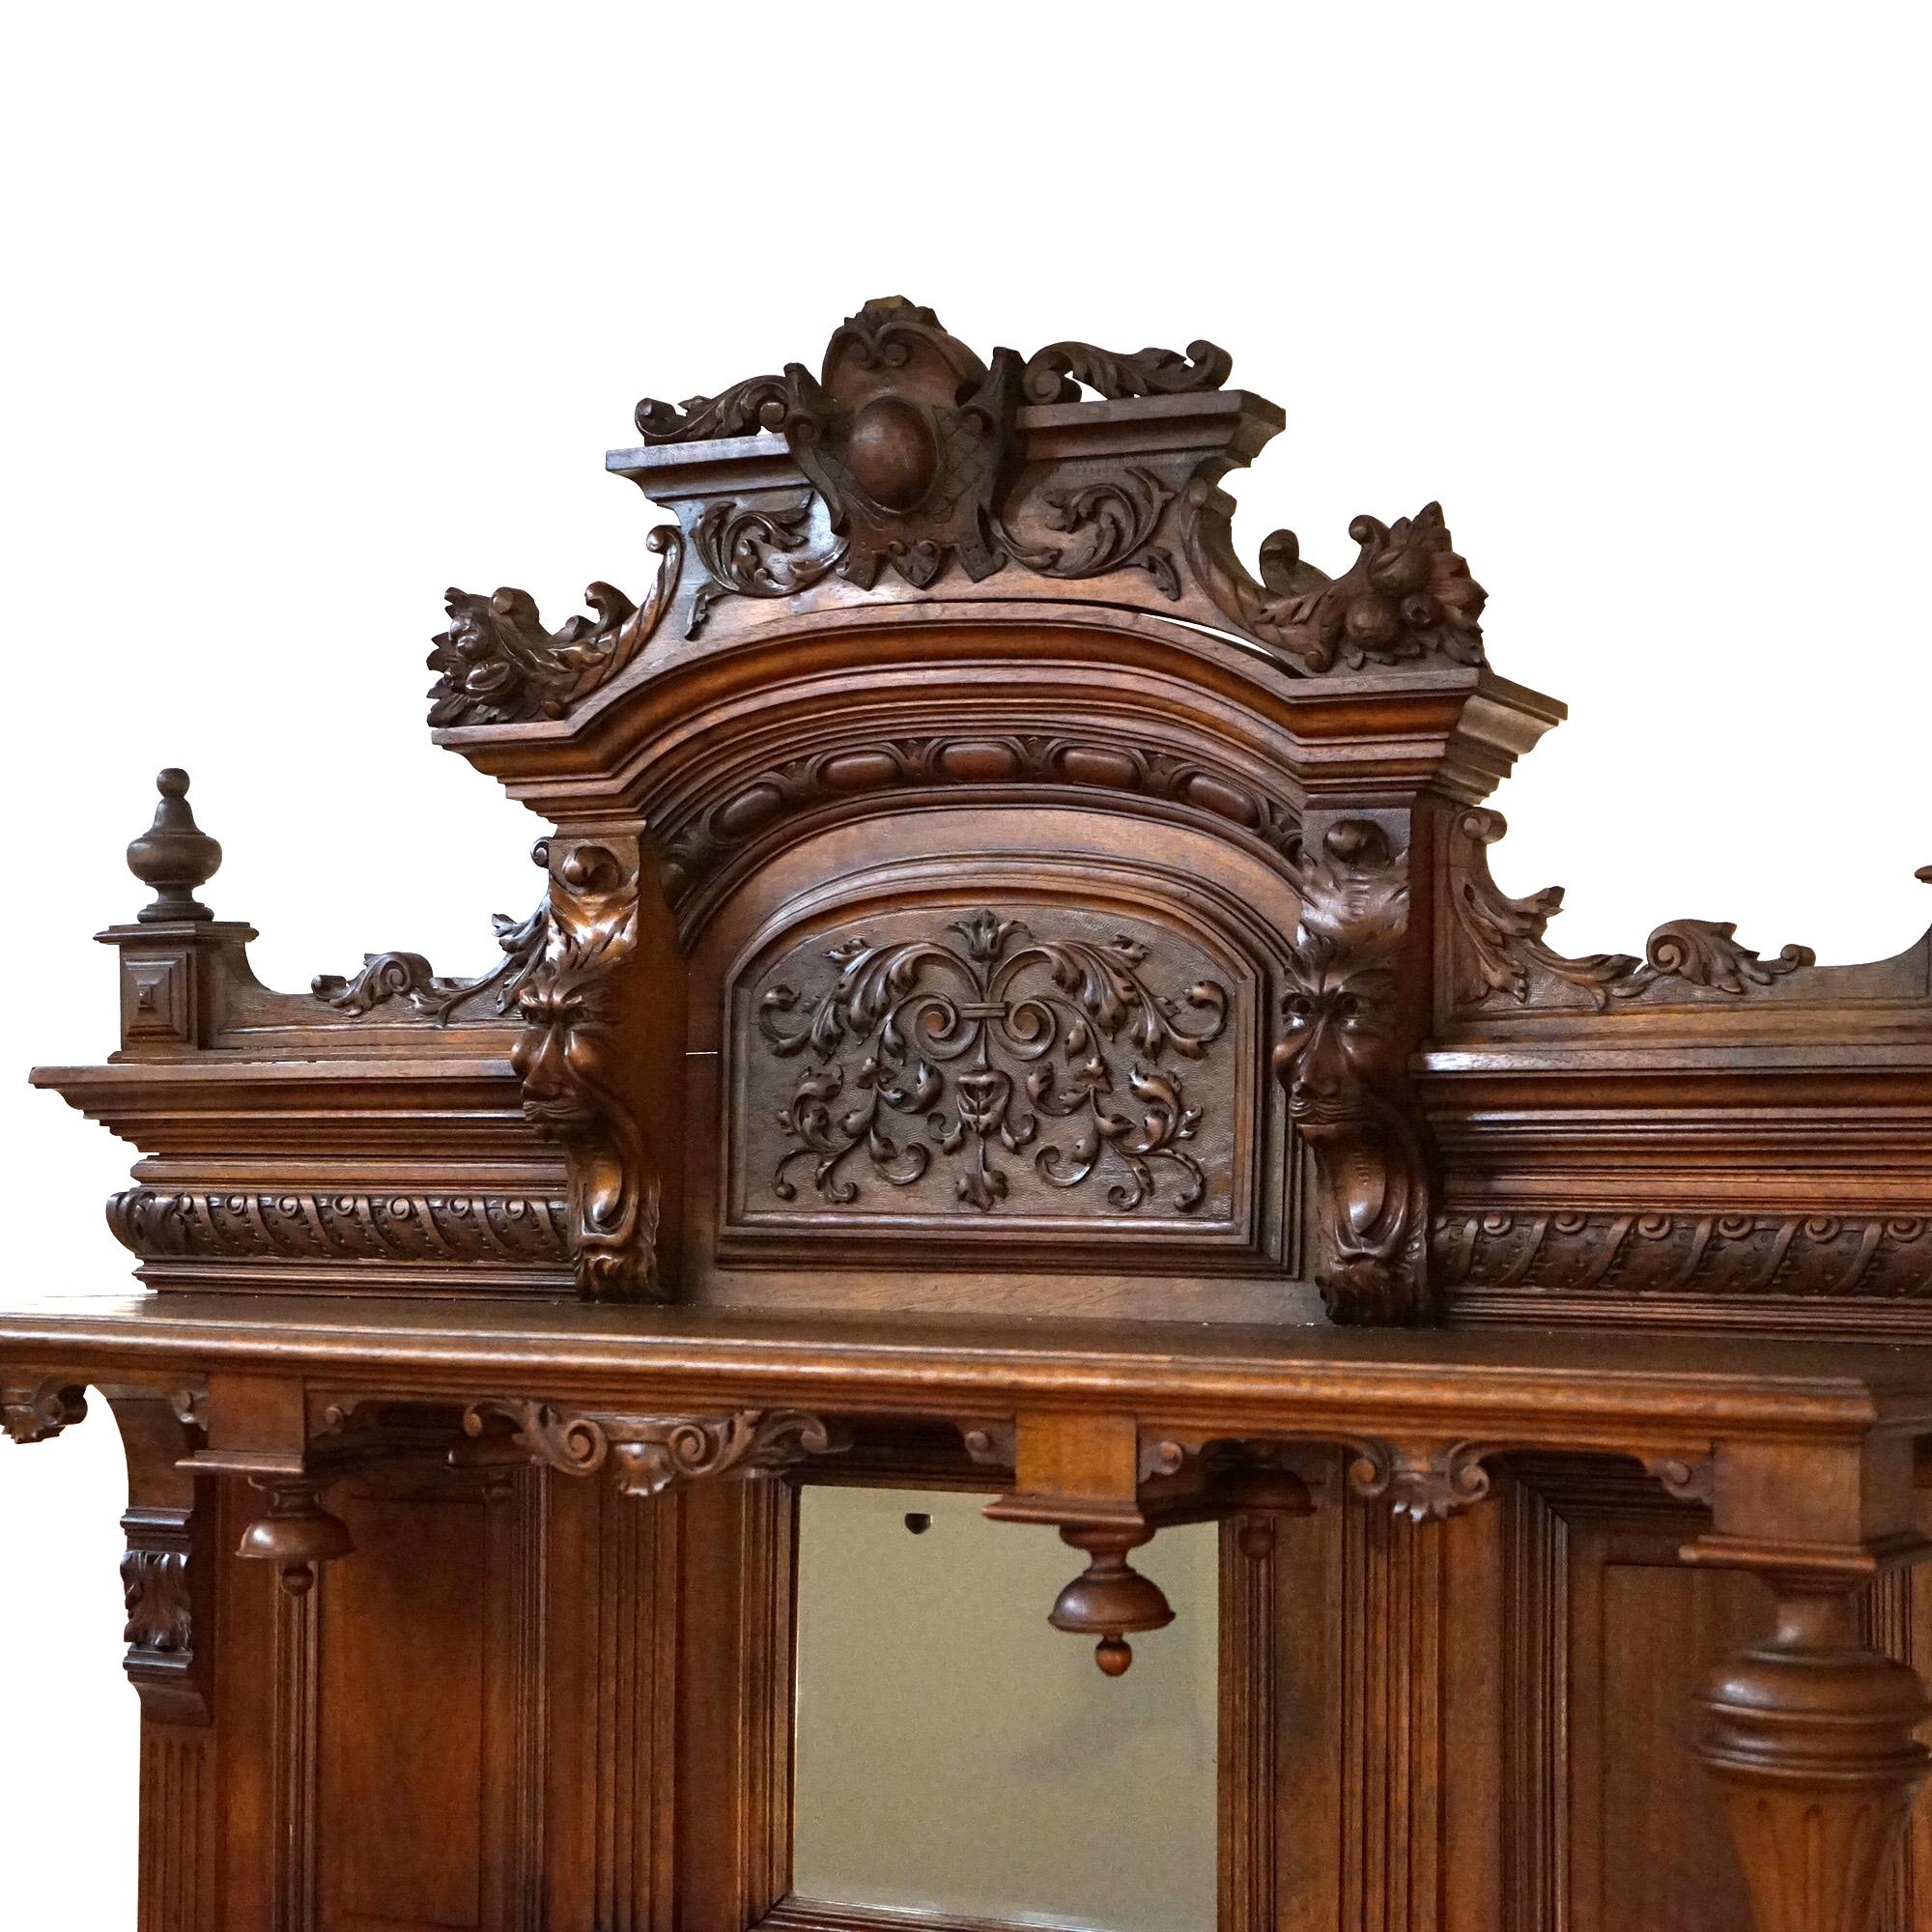 An antique figural French Renaissance hunt board server offers walnut construction with foliate carved pediment having central cartouche and flanking lion heads over backsplash with central beveled mirror and flanking urn form supports; lower marble